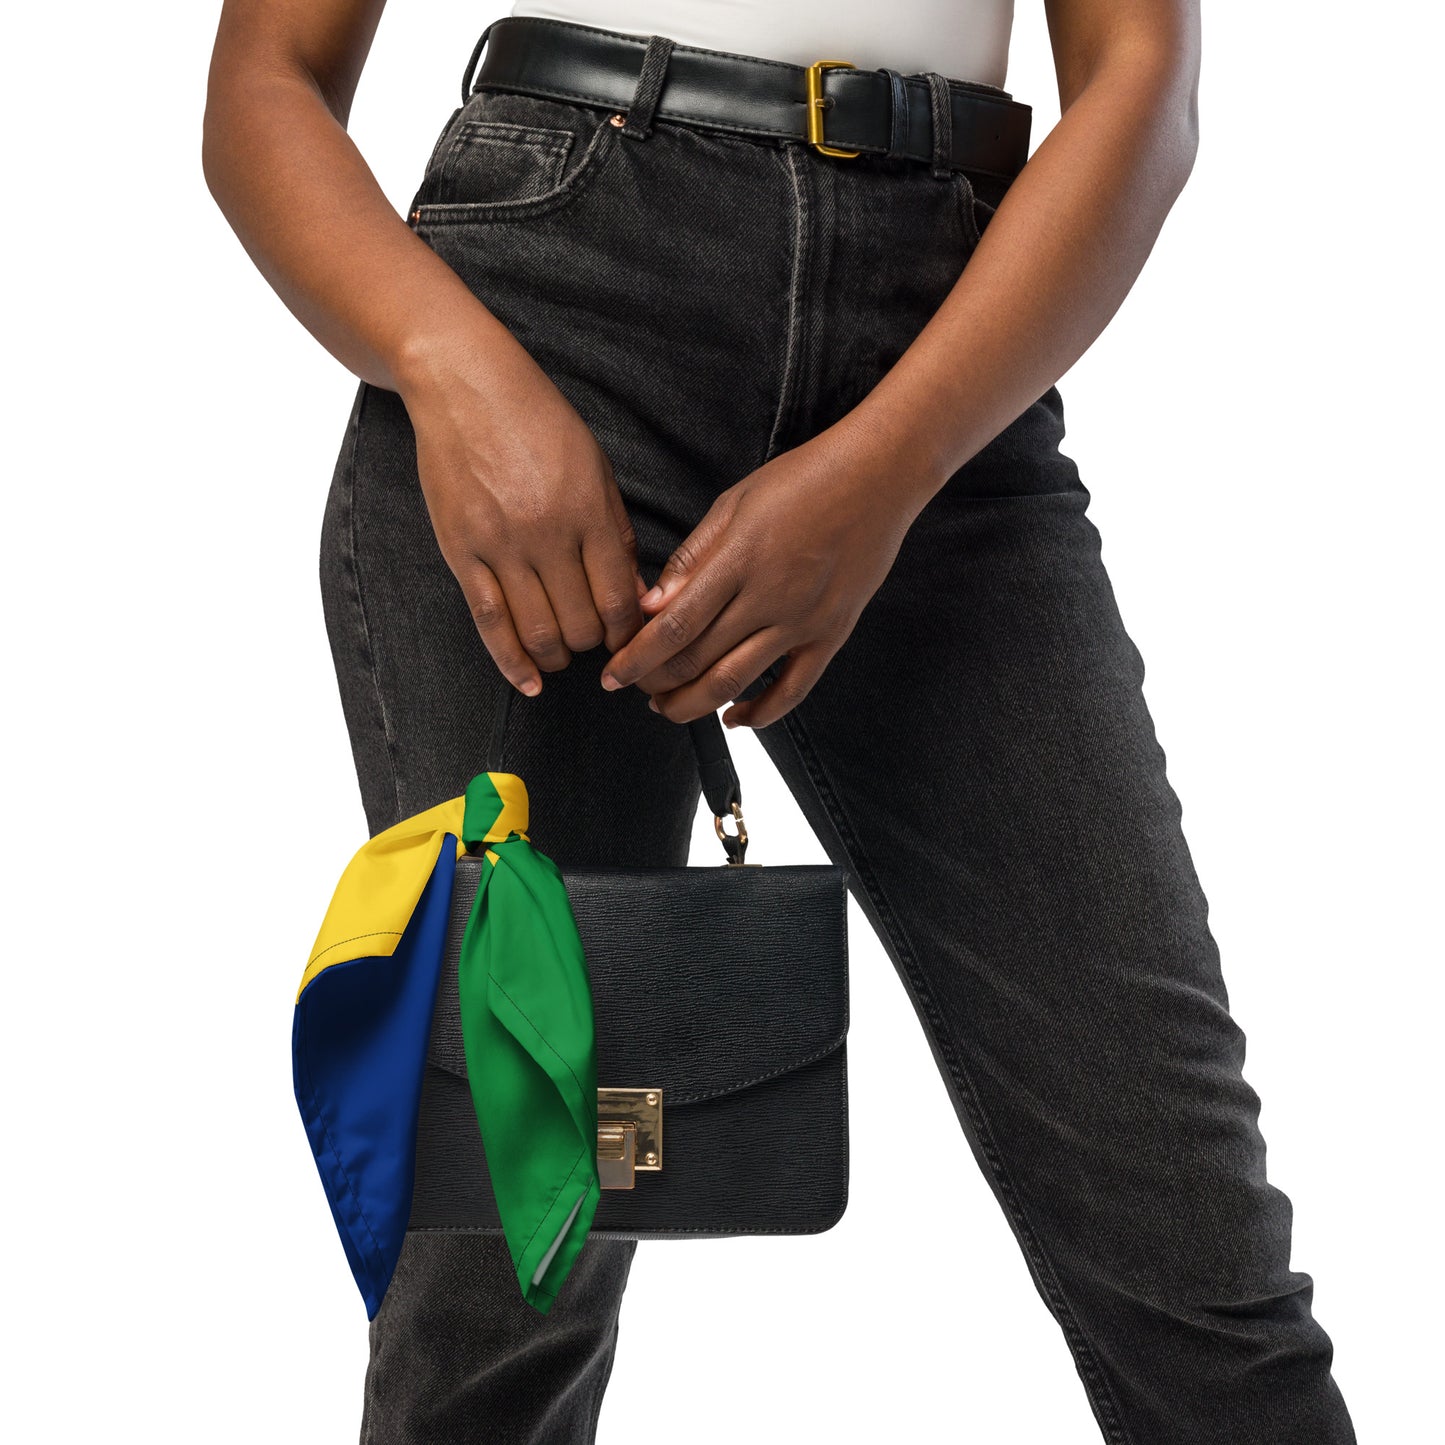 St. Vincent and the Grenadines Bandana